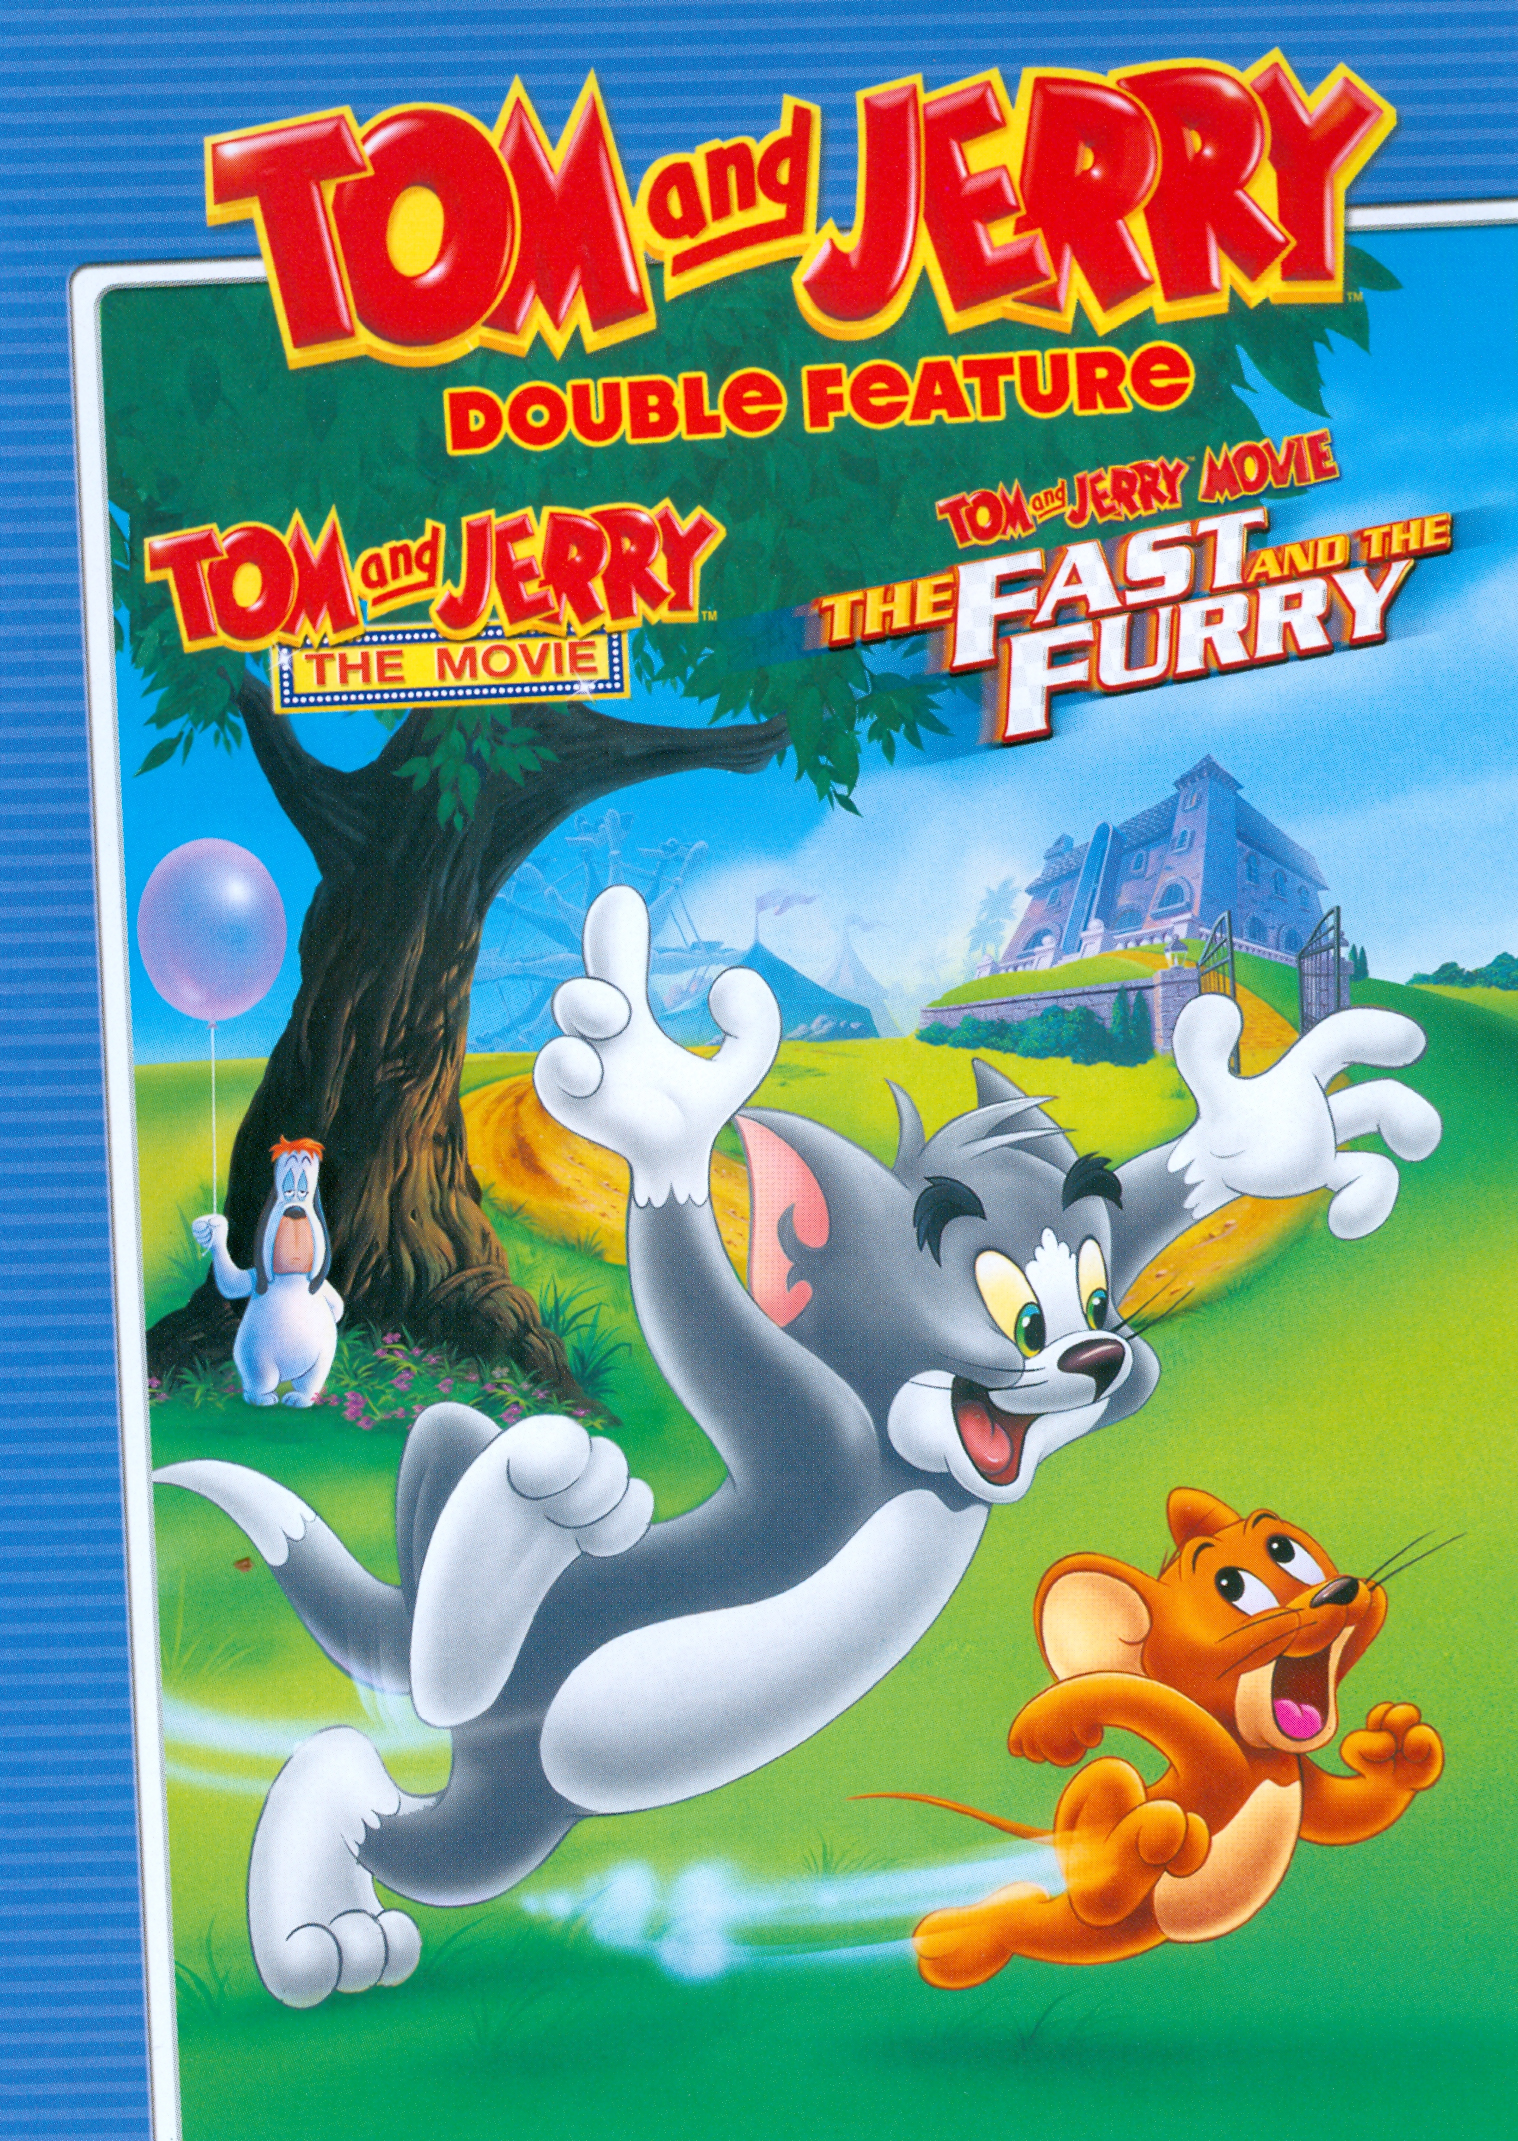 Tom and Jerry: The Movie/Tom and Jerry: The Fast and the Furry [2 Discs]  [DVD] - Best Buy